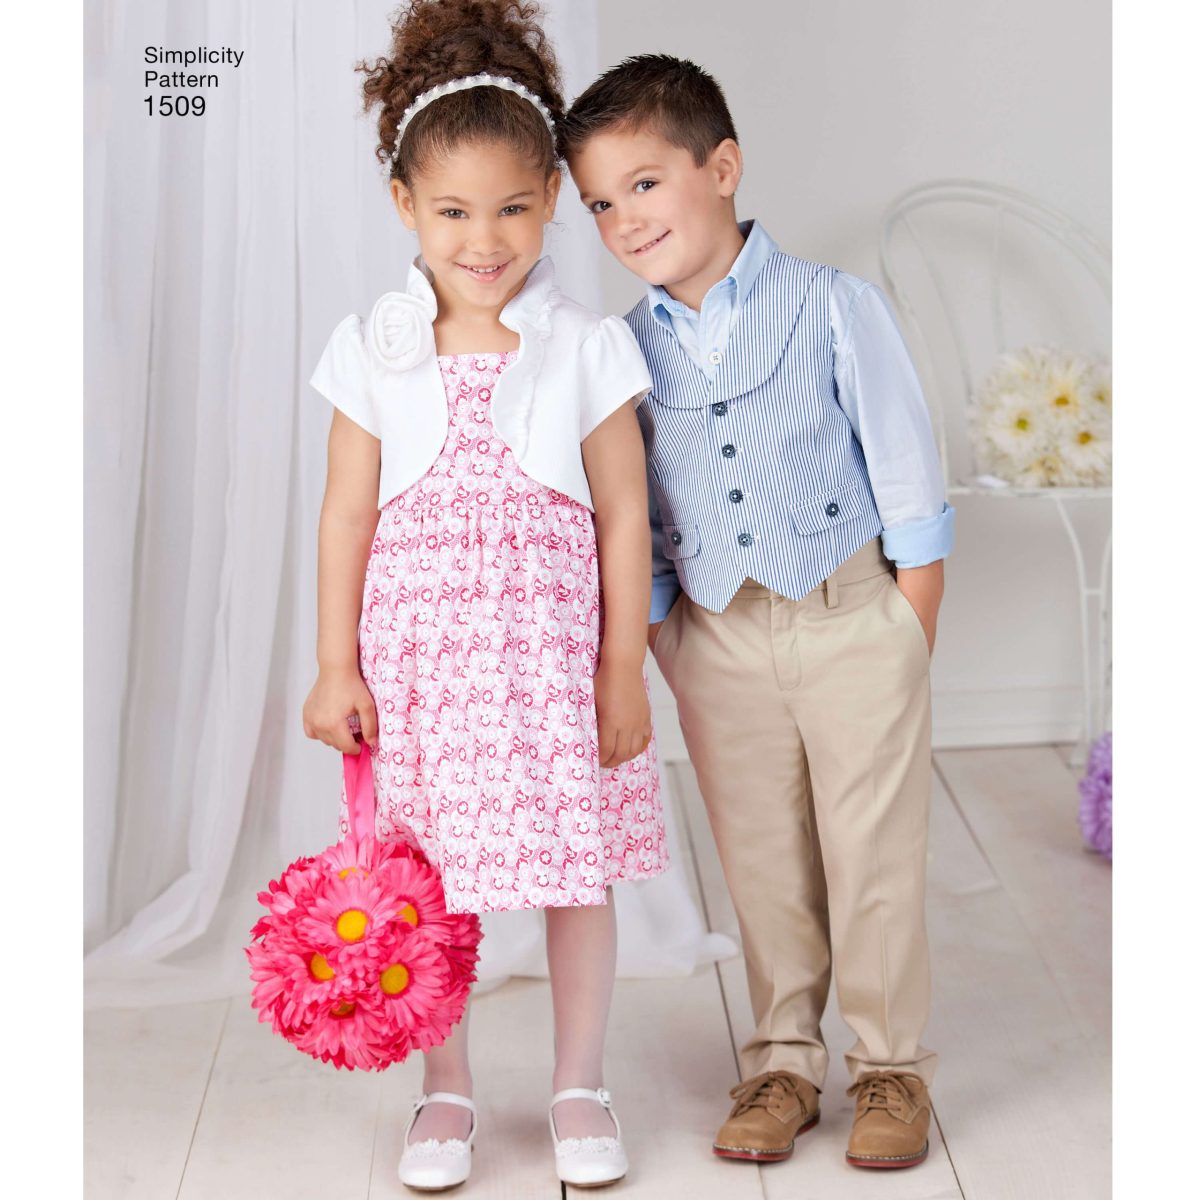 Simplicity Sewing Pattern 1509 Child's Vest, Bolero and Bow Tie